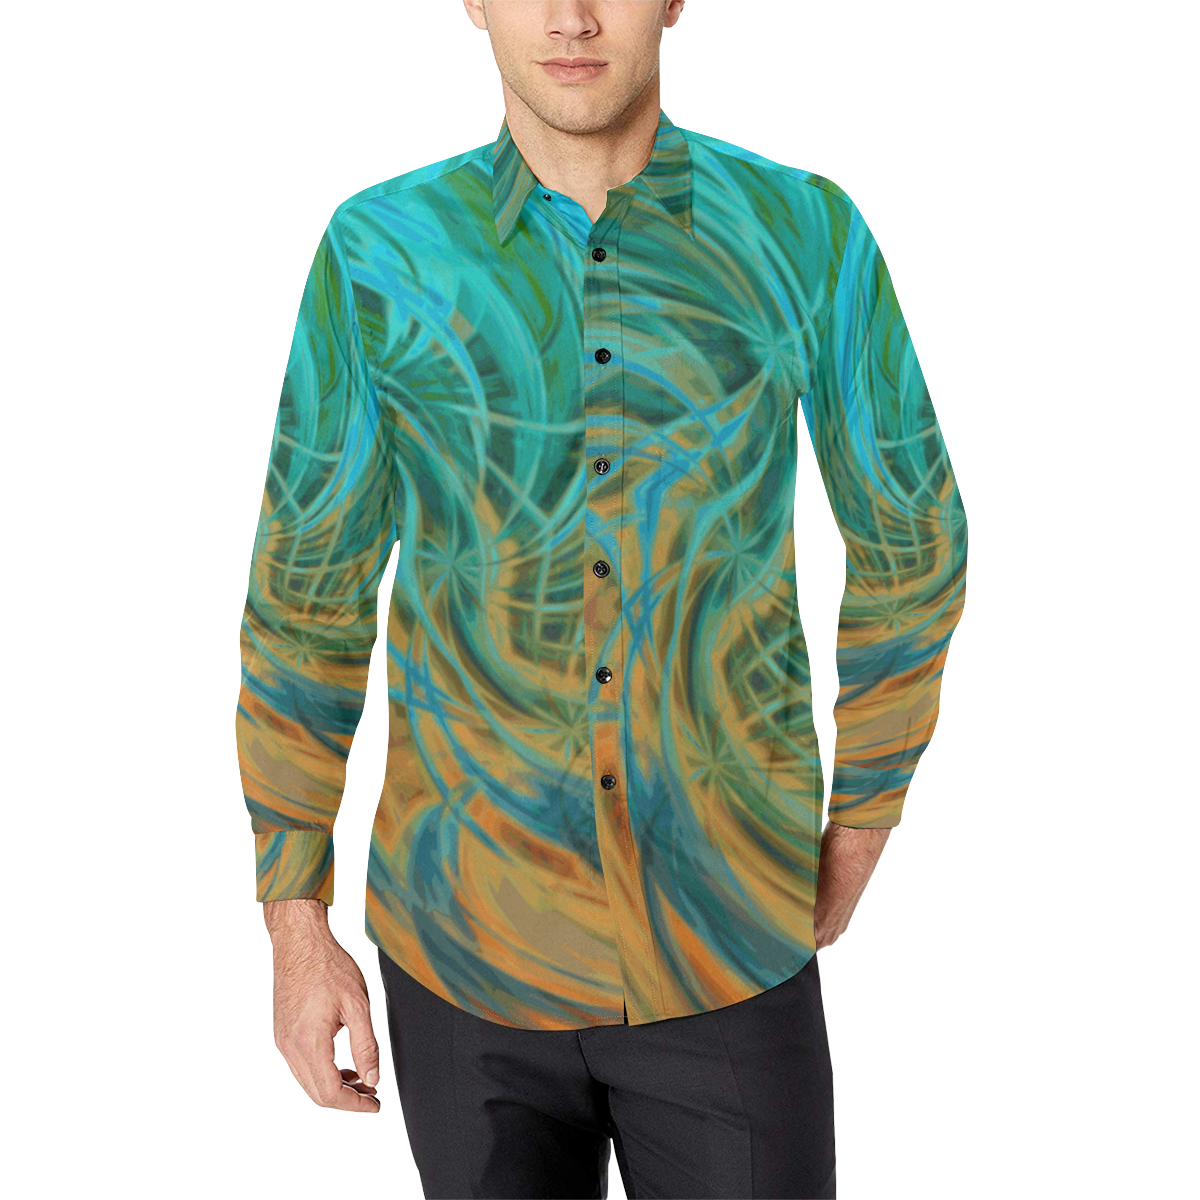 Guava Juice - green turquoise orange spiral pattern Men's All Over Print Casual Dress Shirt (Model T61)